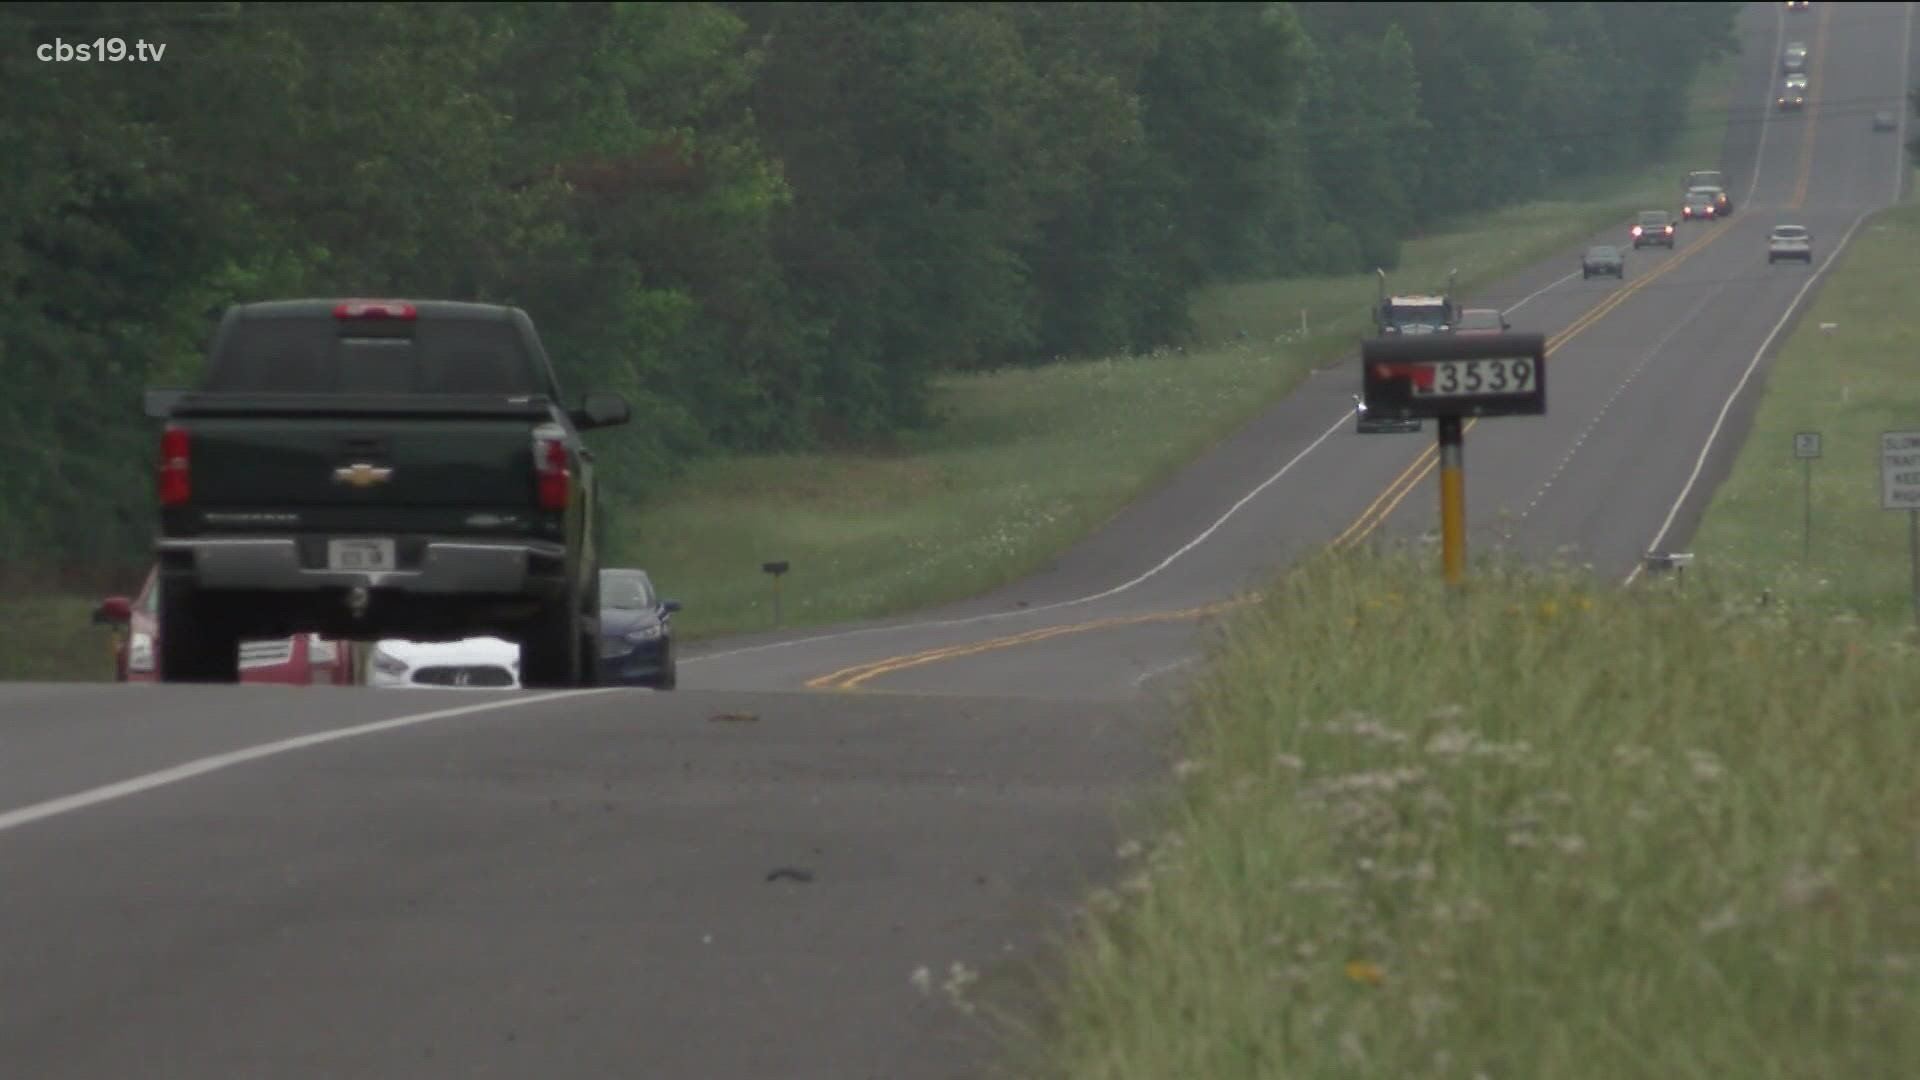 The Texas Department of Transportation reports there have been 8 fatal crashes on State Highway 31 so far this year.